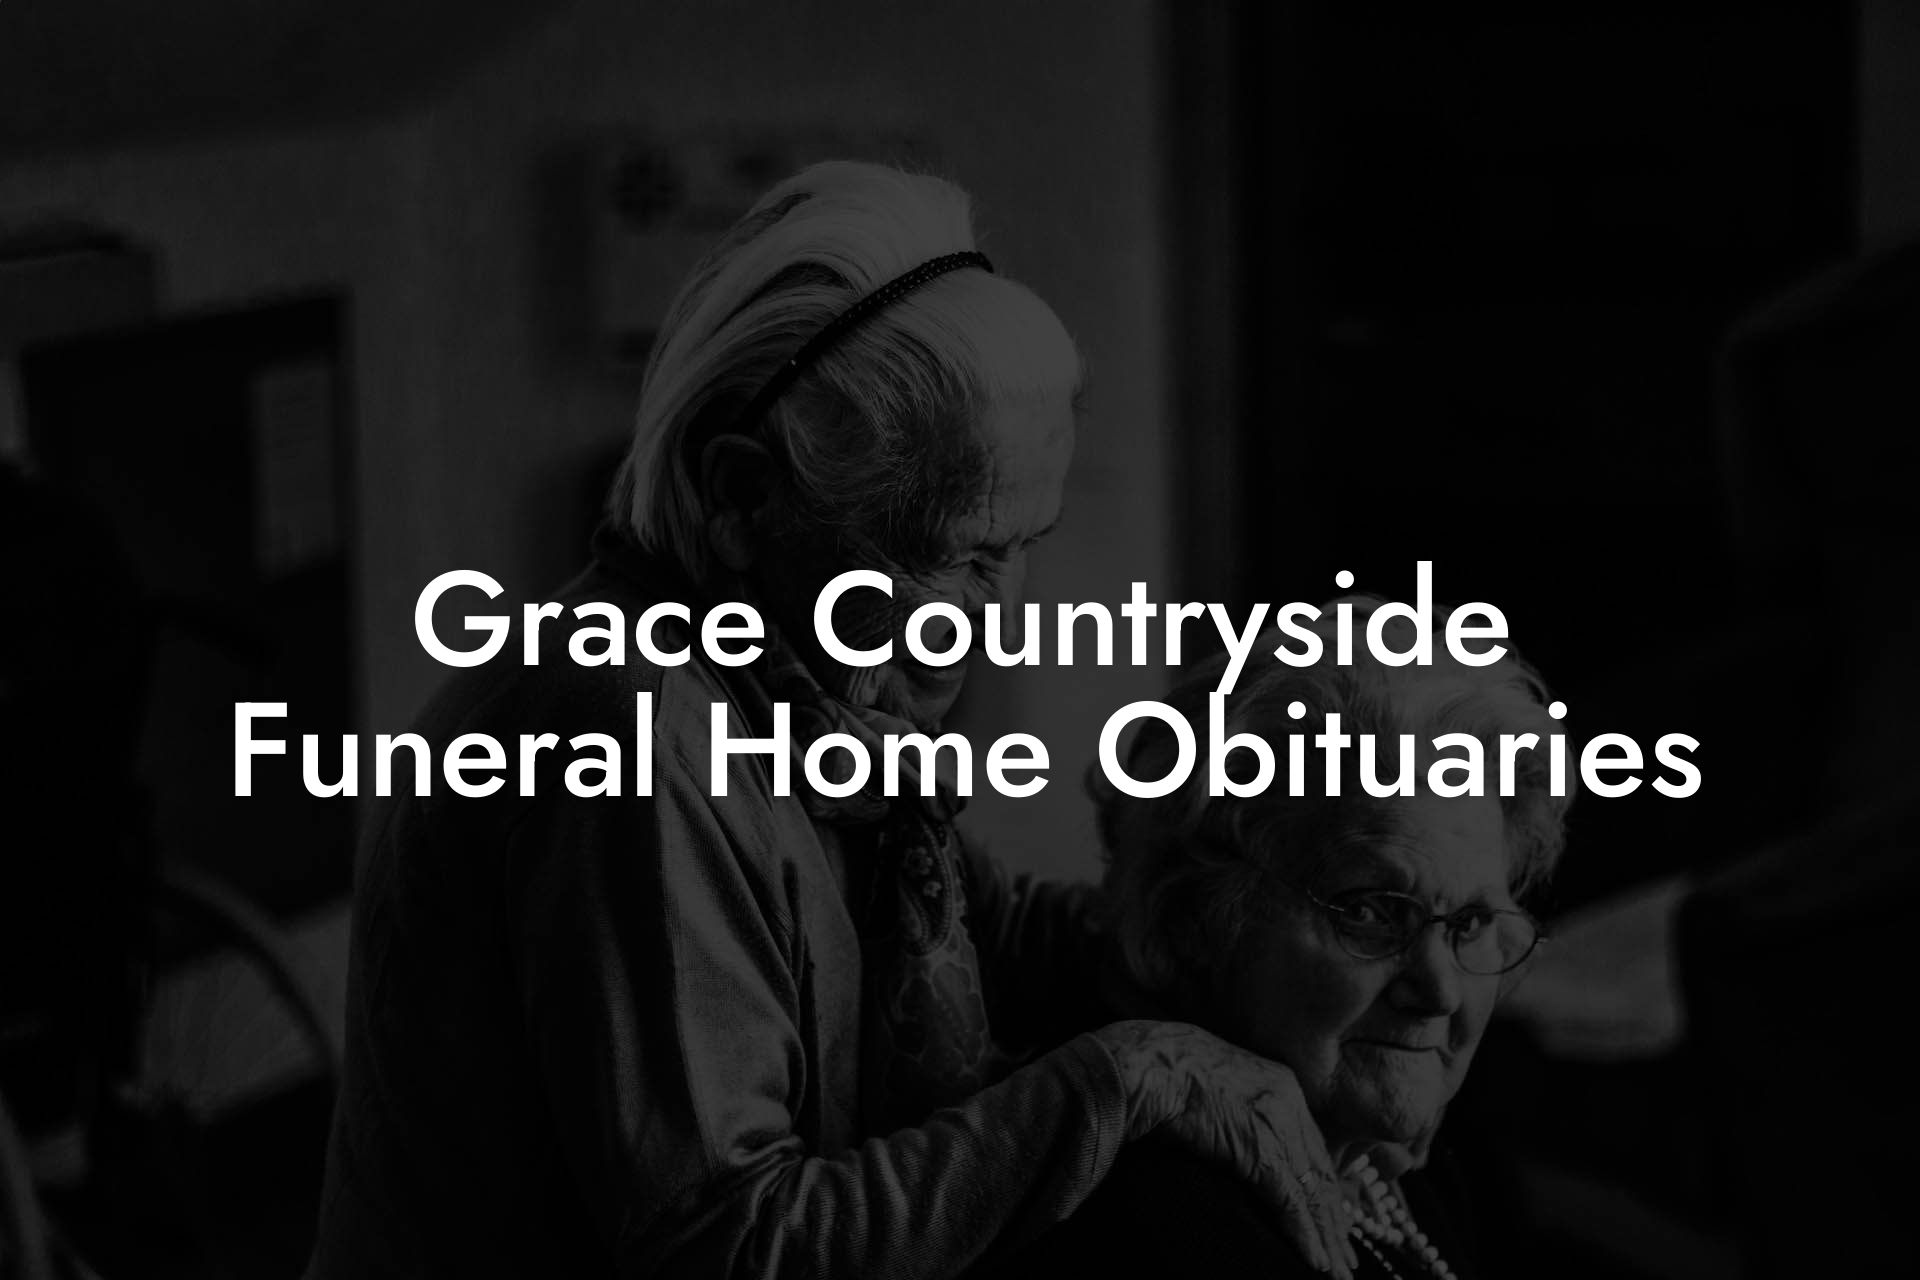 Grace Countryside Funeral Home Obituaries